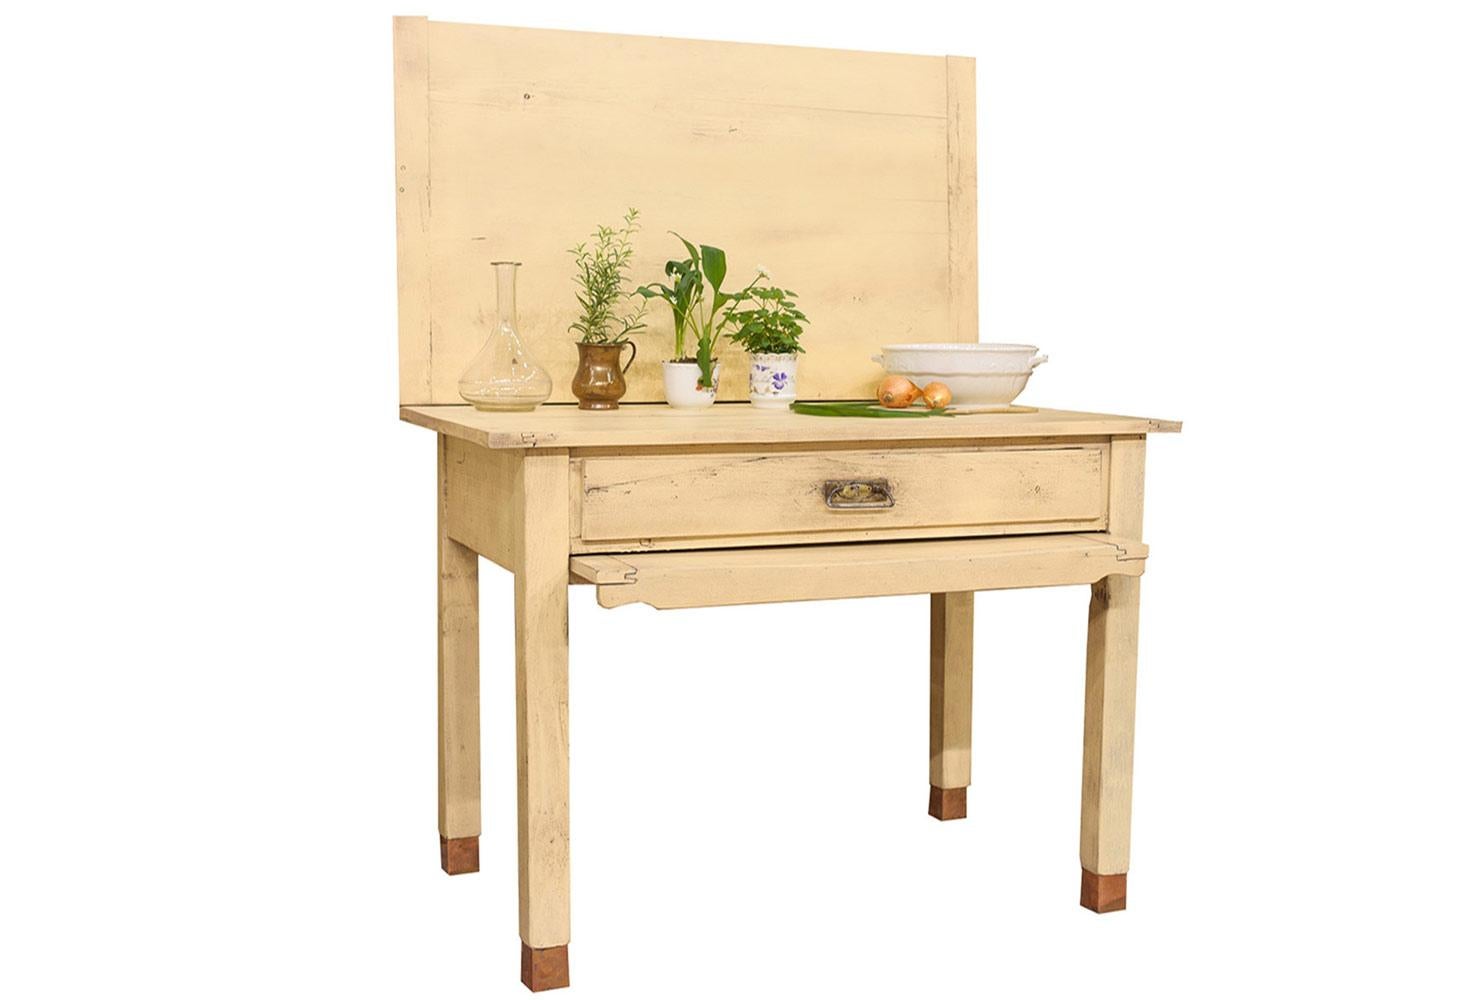 Rustic painted pine table. A versatile kitchen table featuring a top which pivots through 90 degrees to reveal a storage box beneath then unfolds to double its surface area. Could also be used as a kitchen island or a dining table. In strong sturdy